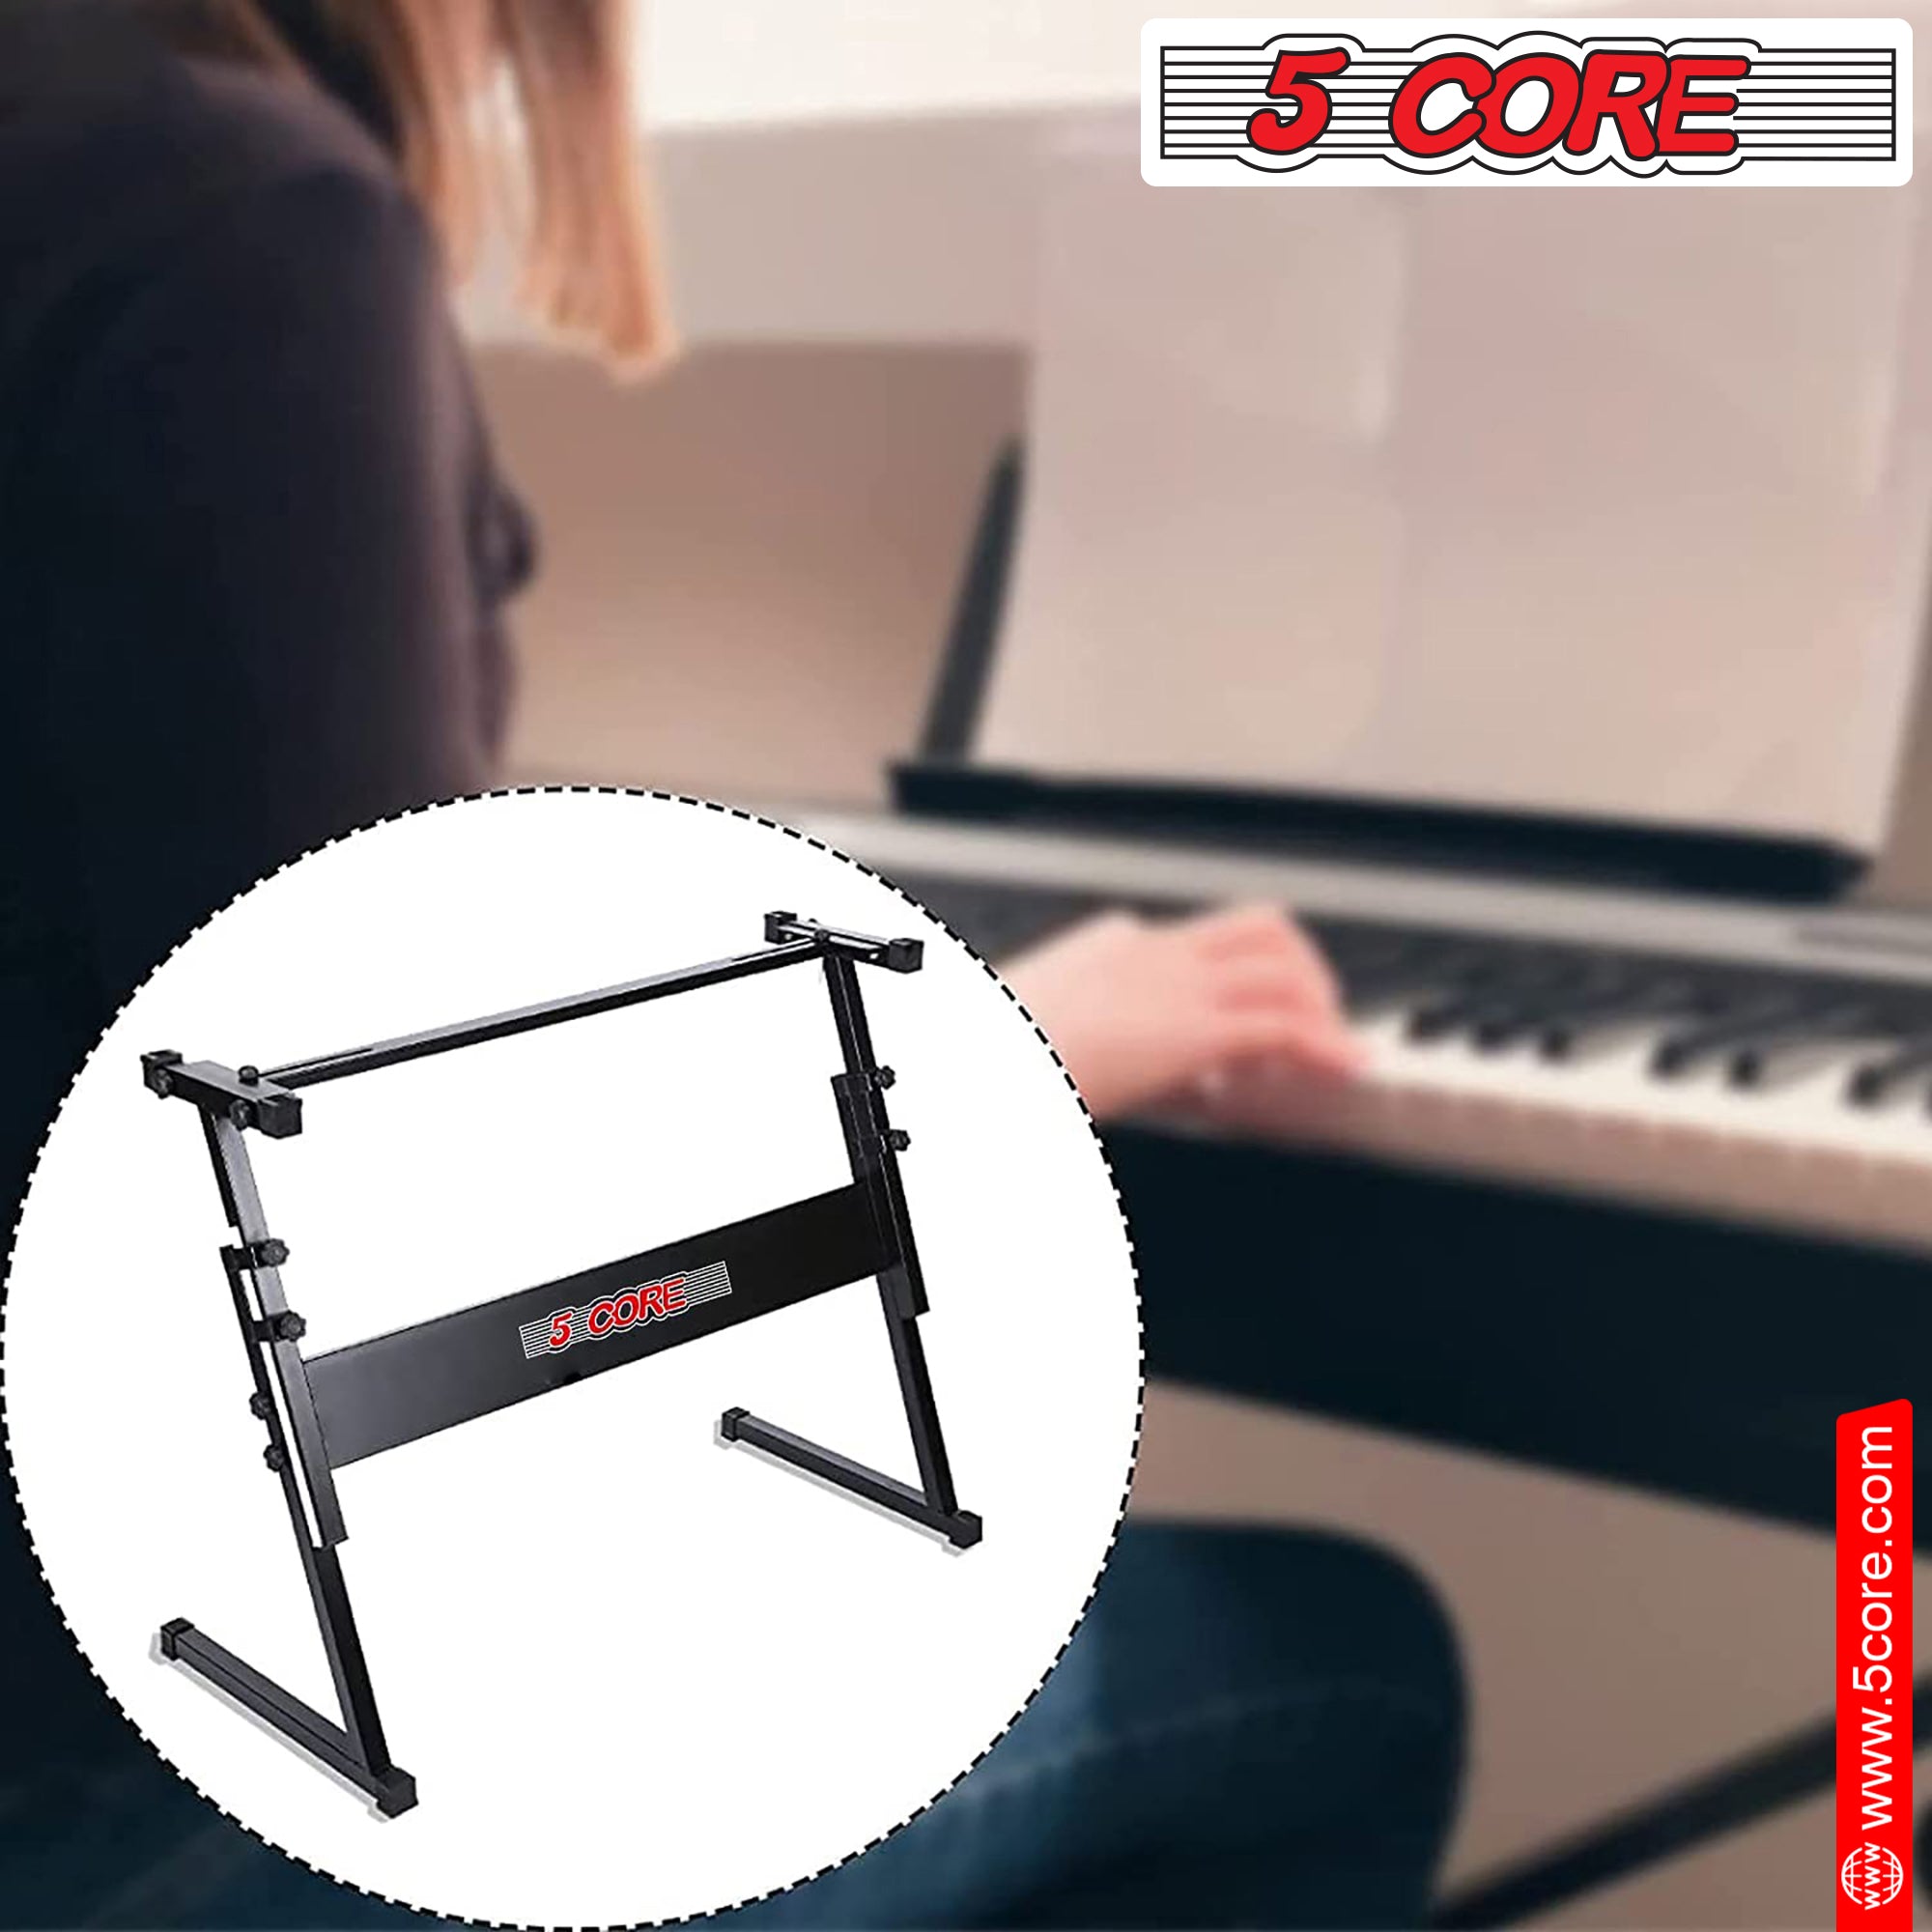 5 Core Piano Keyboard Stand 1 Piece for 61 or 54 Keys Black Height Adjustable Z Stand Casio Midi controller Stand - KS Z1